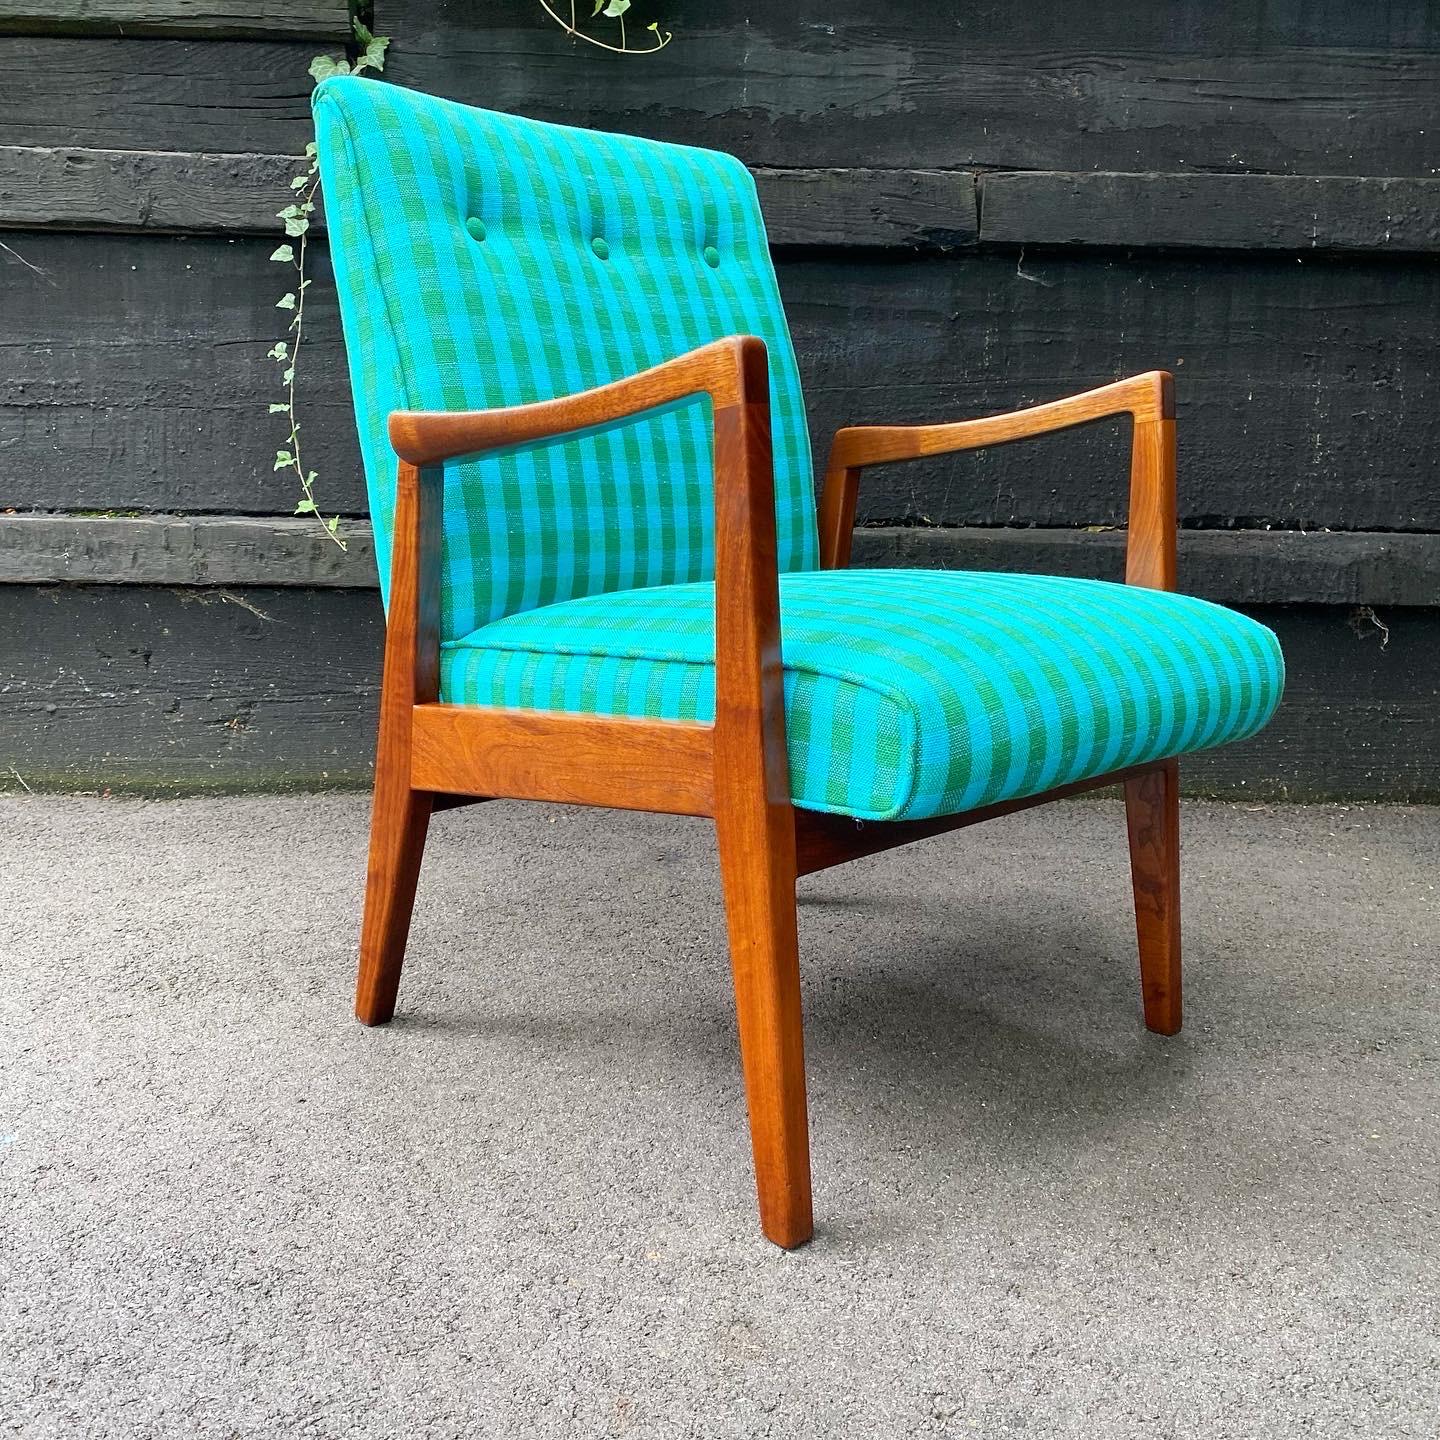 This is a studio craft solid walnut lounge chair designed and handmade by Arden Riddle, ca. 1960's. The chair features new old stock green and blue check upholstery from Arden's studio. The foam and fabric were professionally replaced by Copley